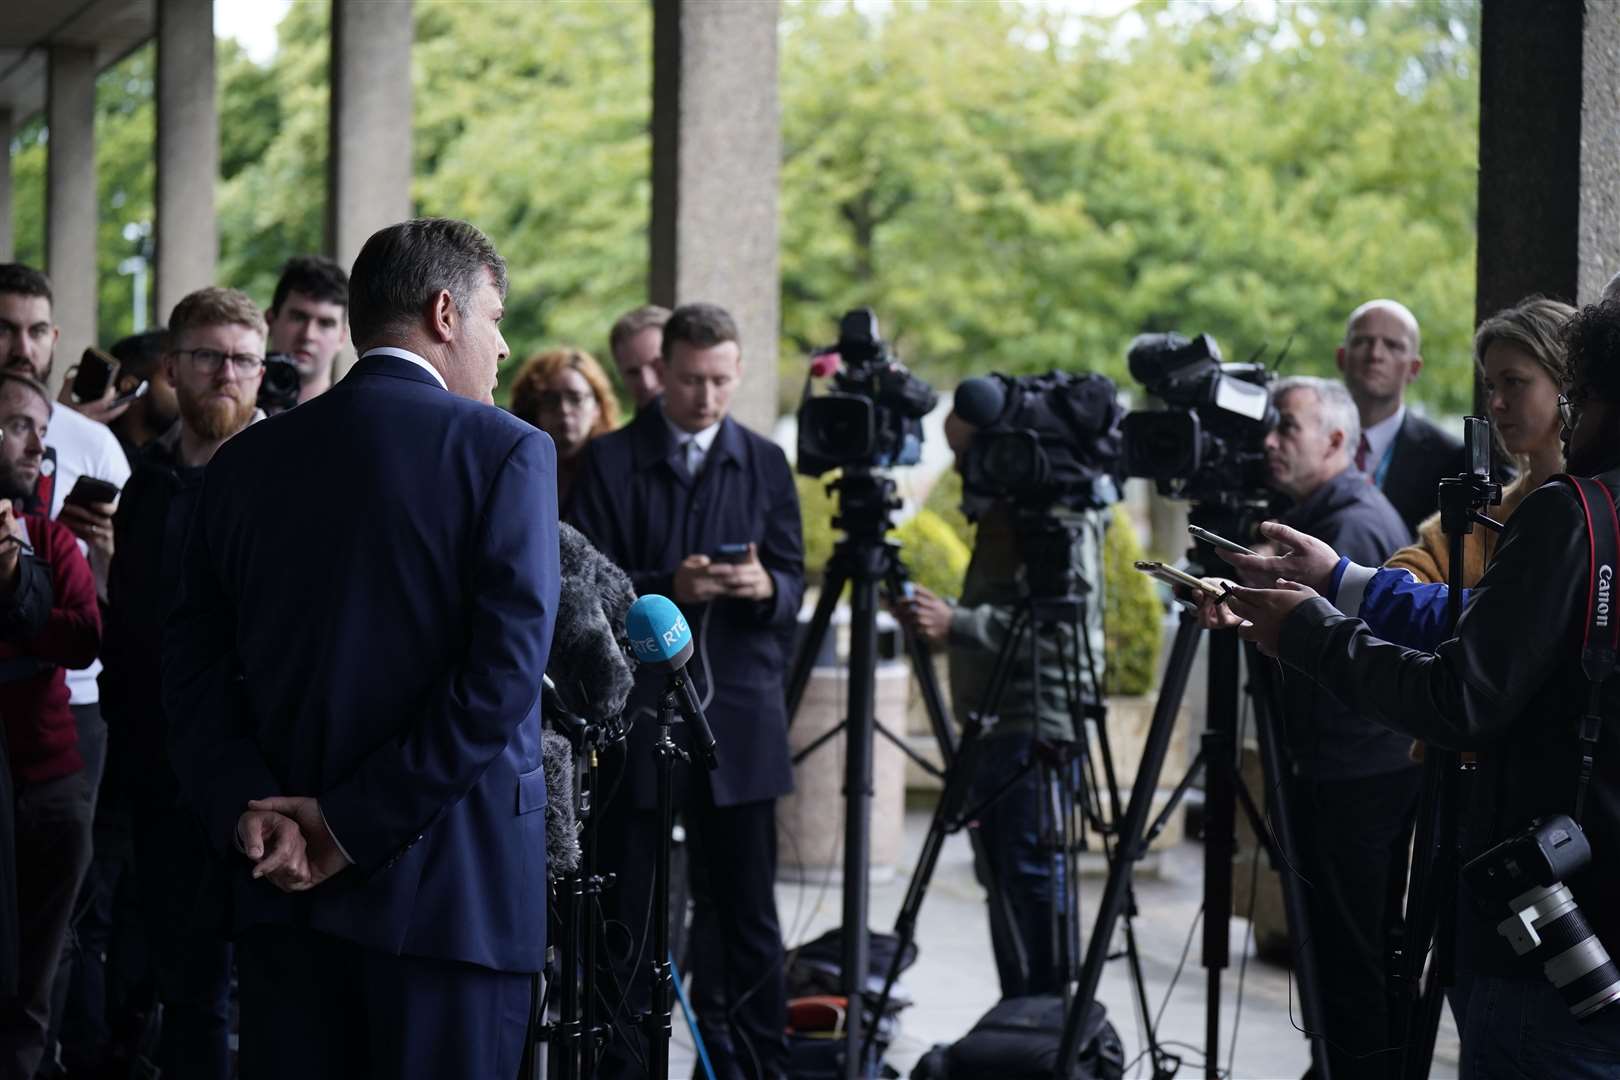 New RTE director general Kevin Bakhurst speaks to the media on his first day in the job (Niall Carson/PA)